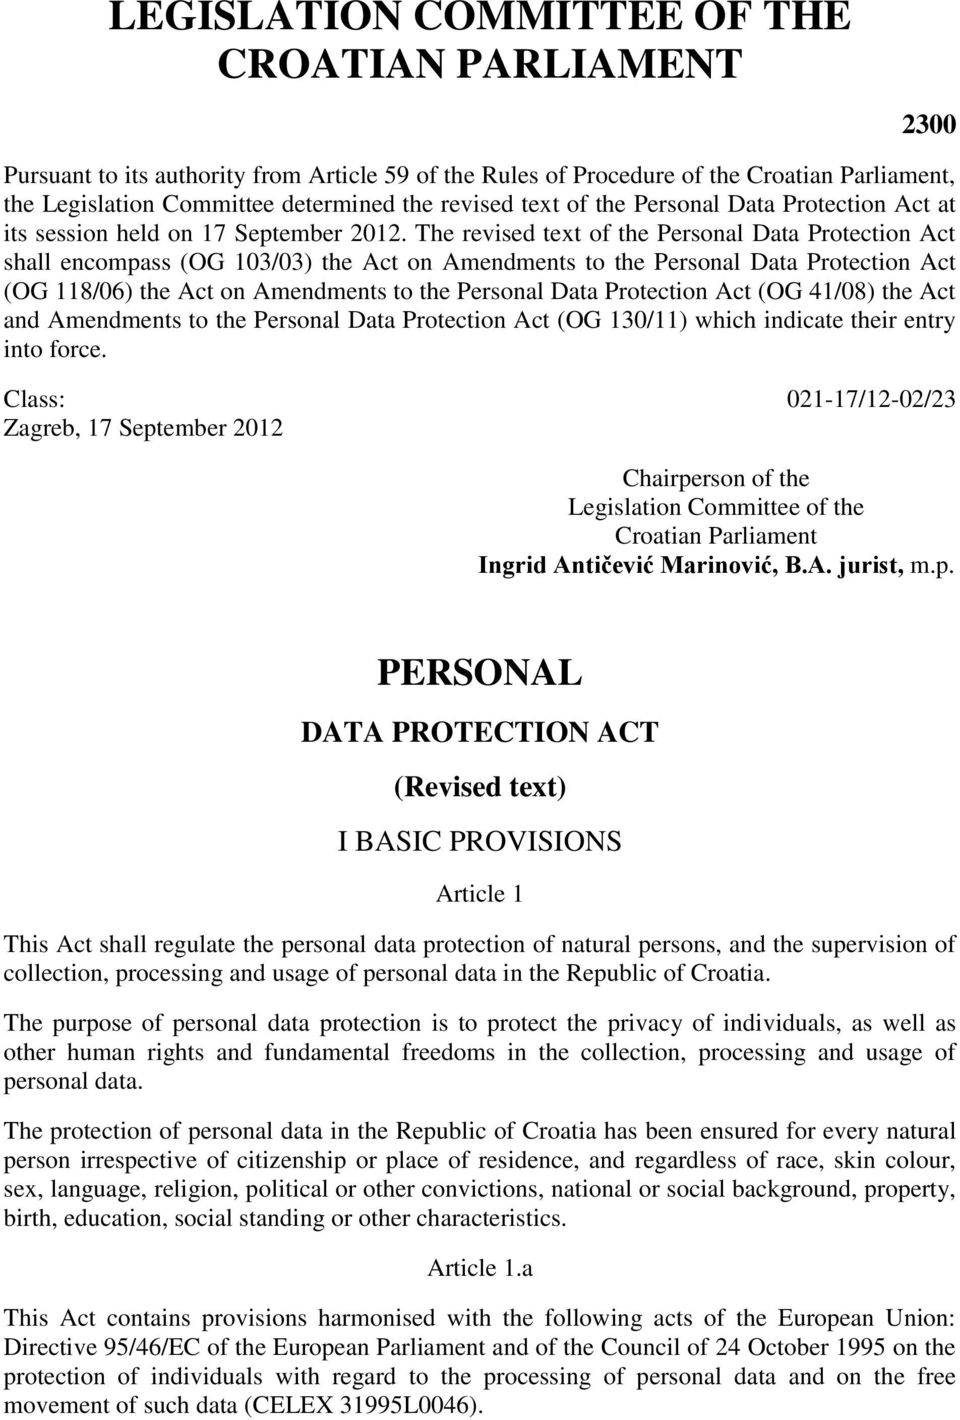 The revised text of the Personal Data Protection Act shall encompass (OG 103/03) the Act on Amendments to the Personal Data Protection Act (OG 118/06) the Act on Amendments to the Personal Data